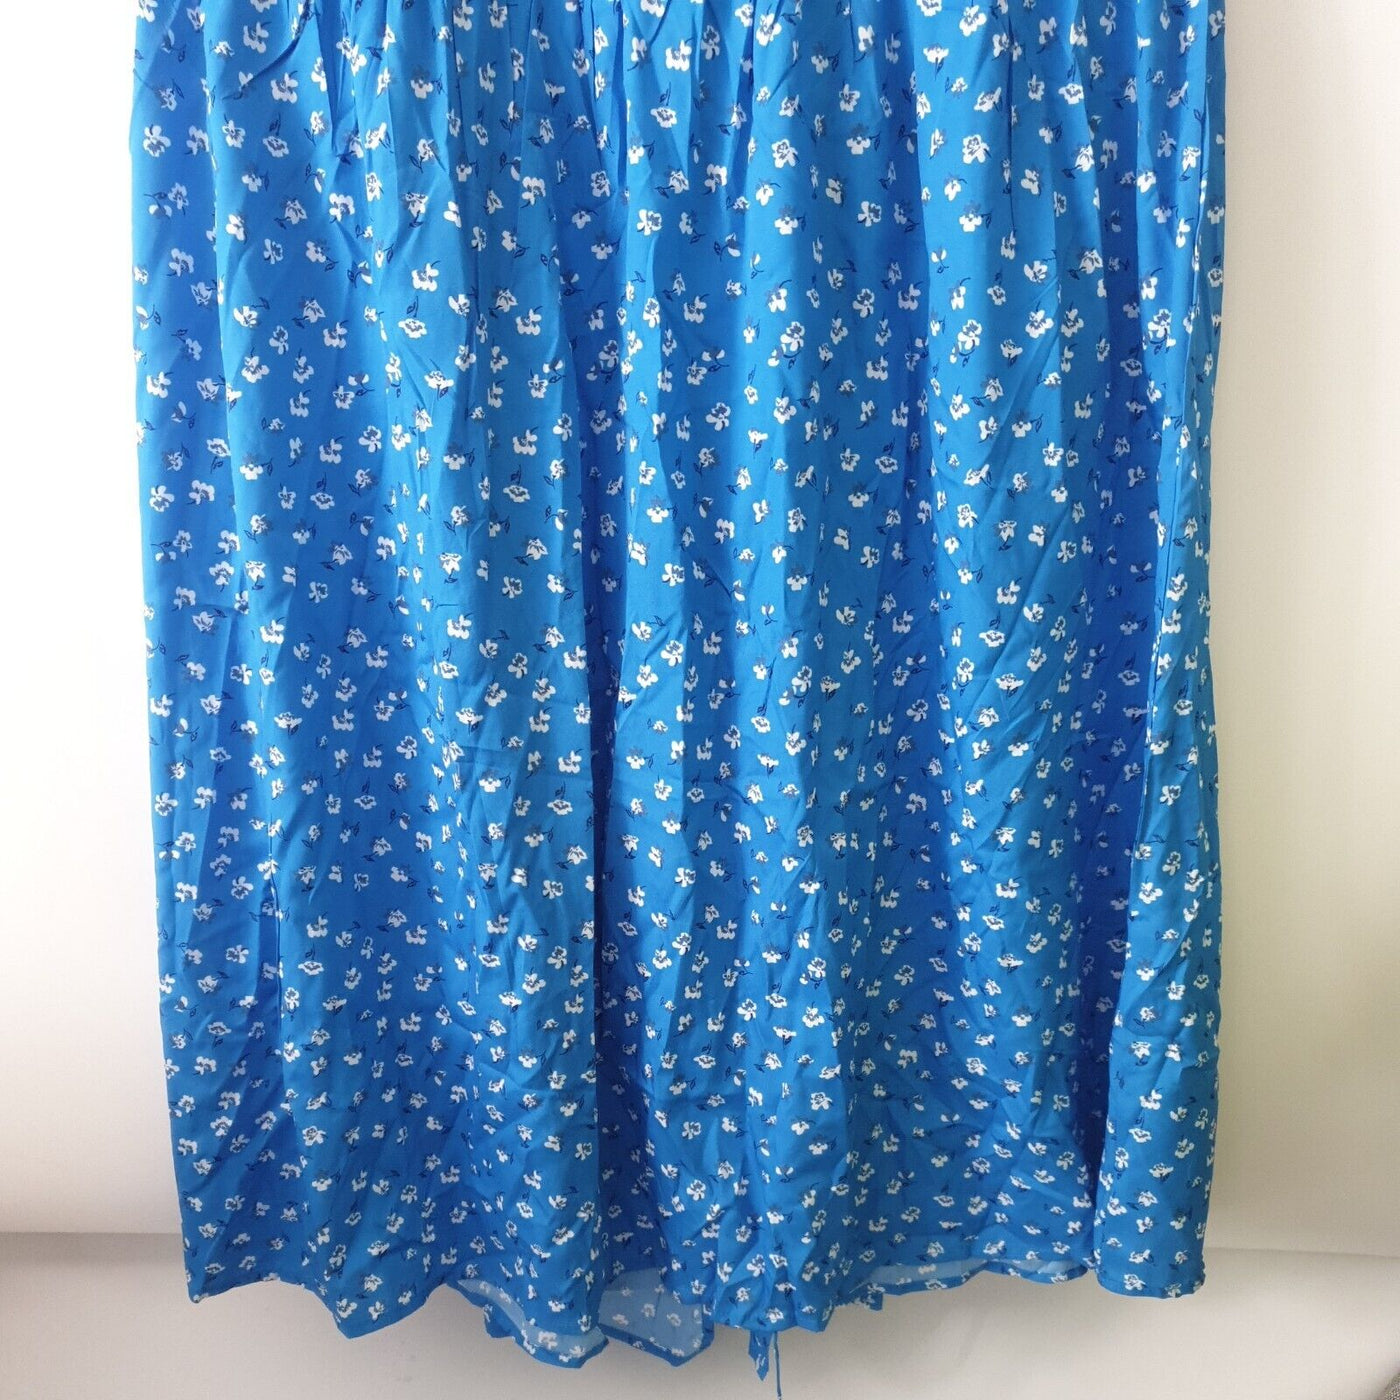 In The Style Floral Dress Blue Wrap Size 10 ****Ref V513